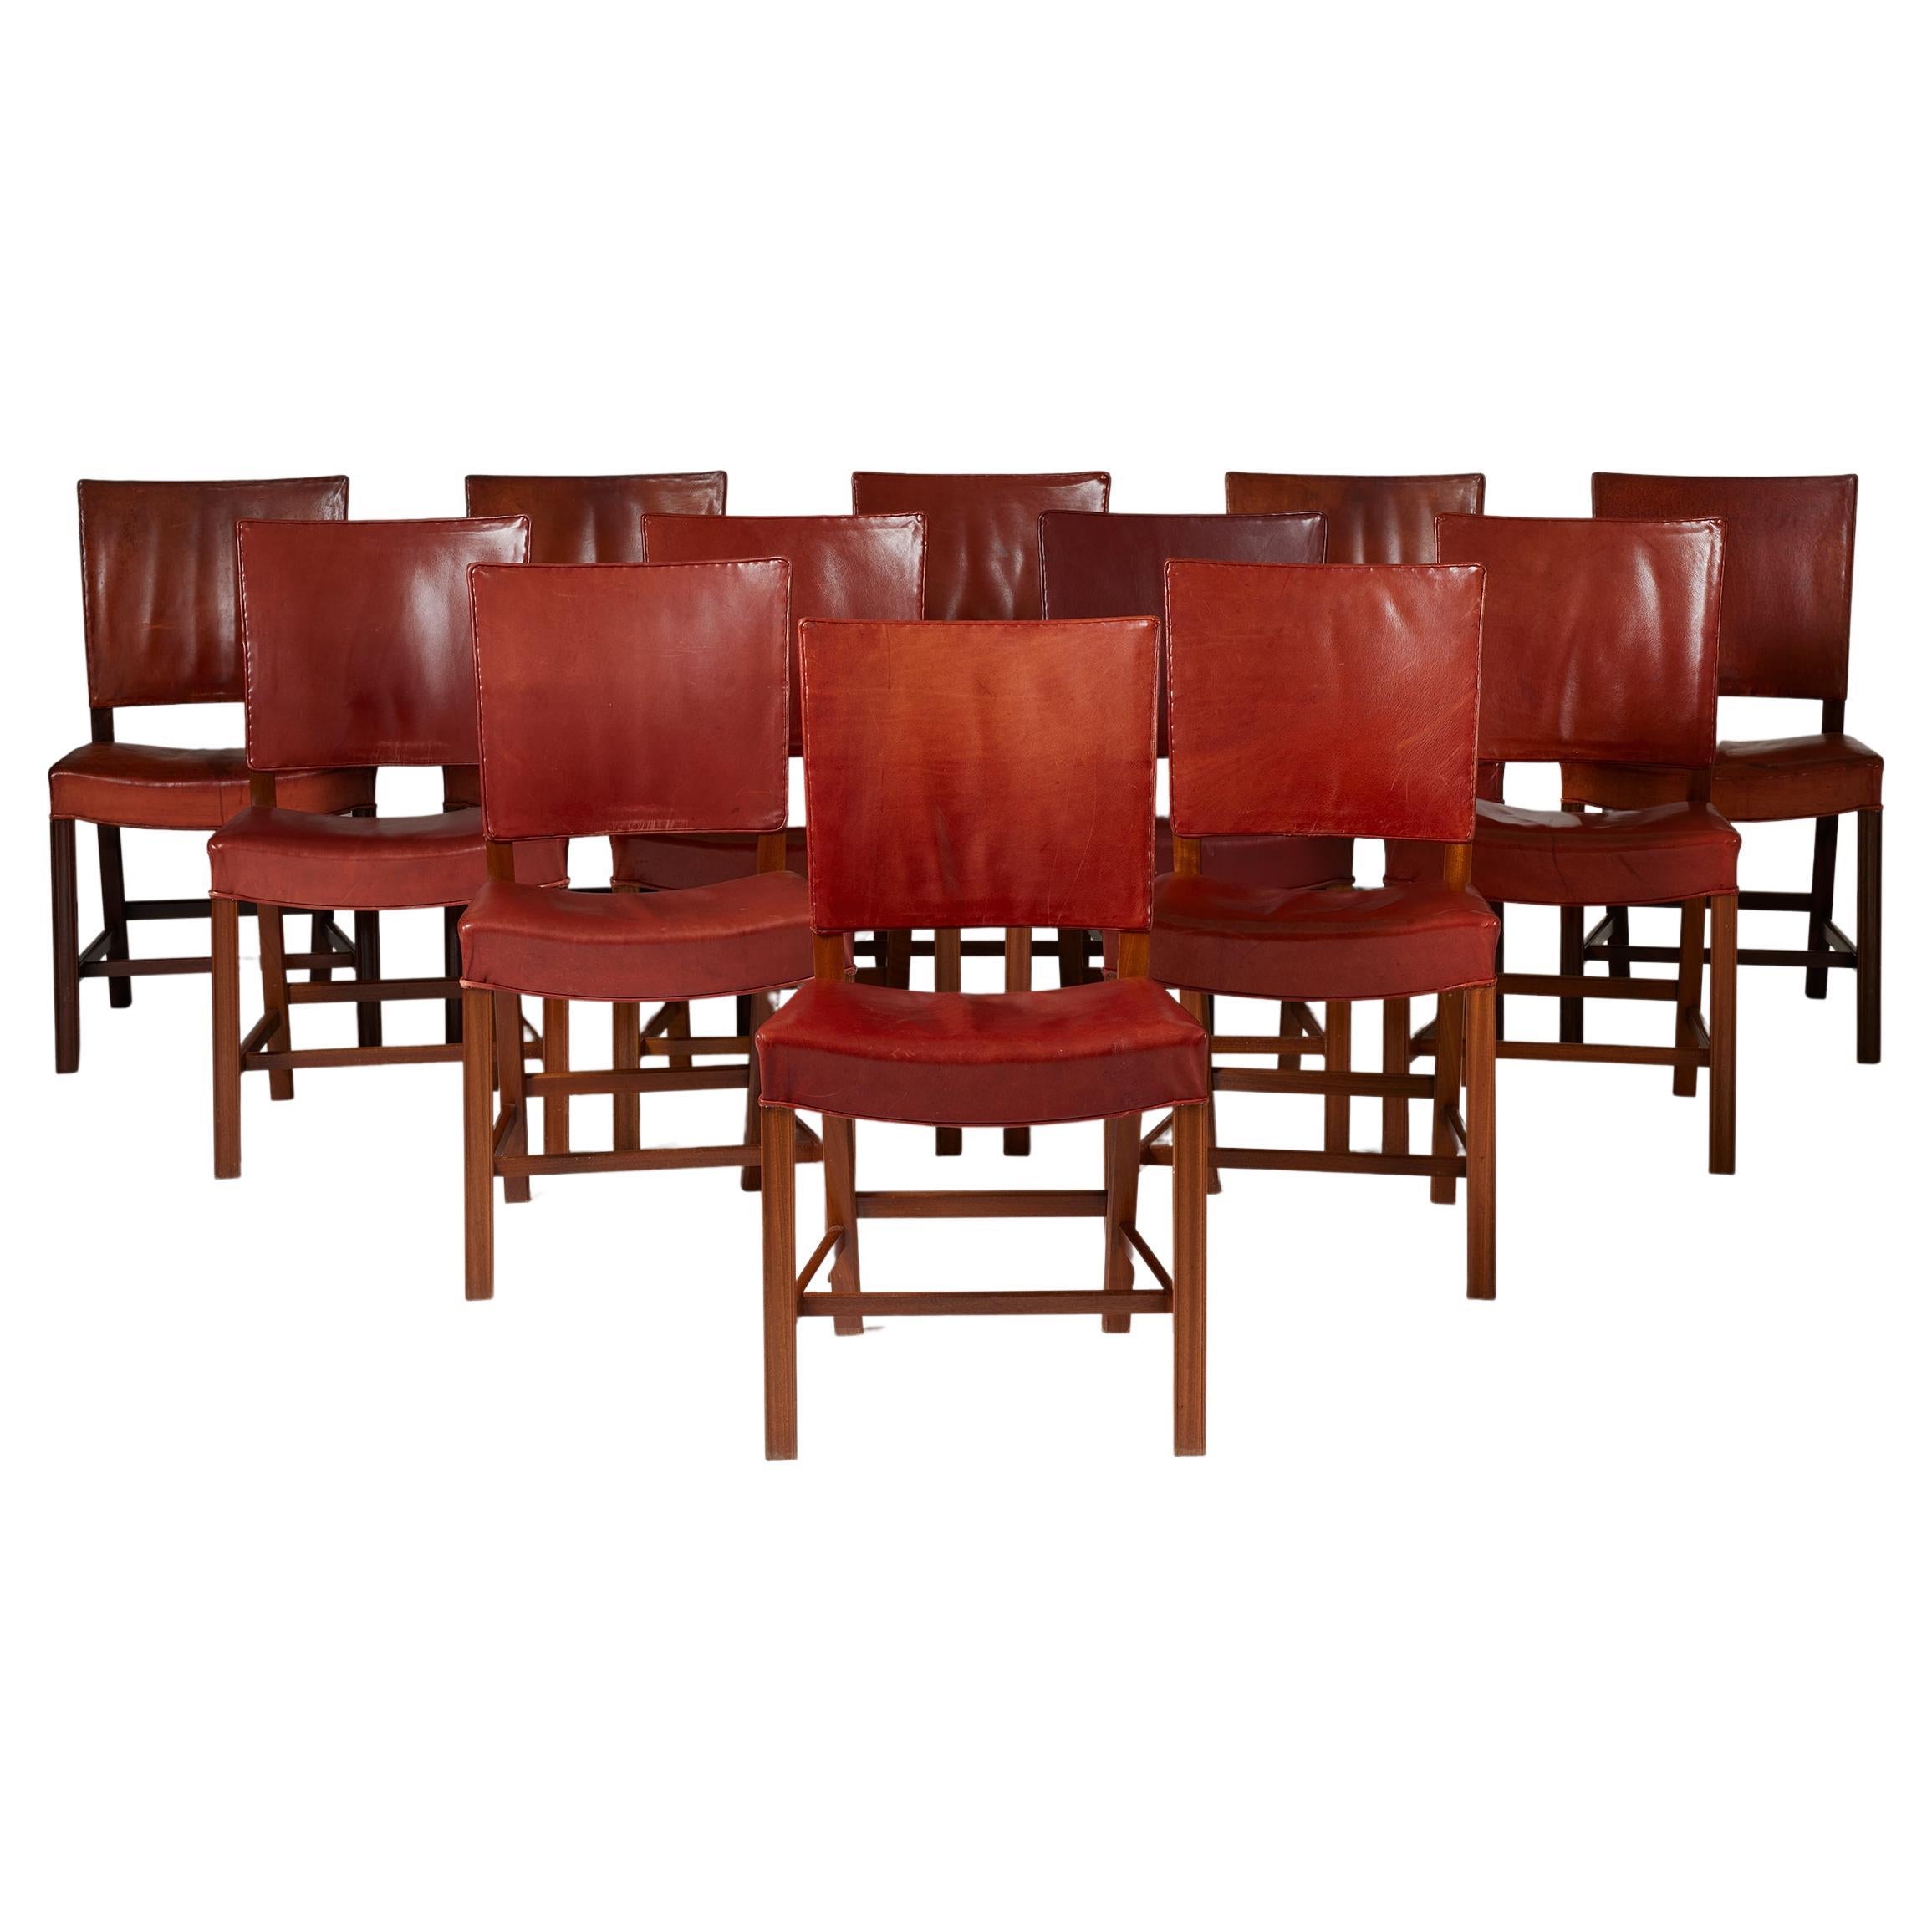 Set of twelve dining chairs ‘The Red Chair’ model 3949 designed by Kaare Klint